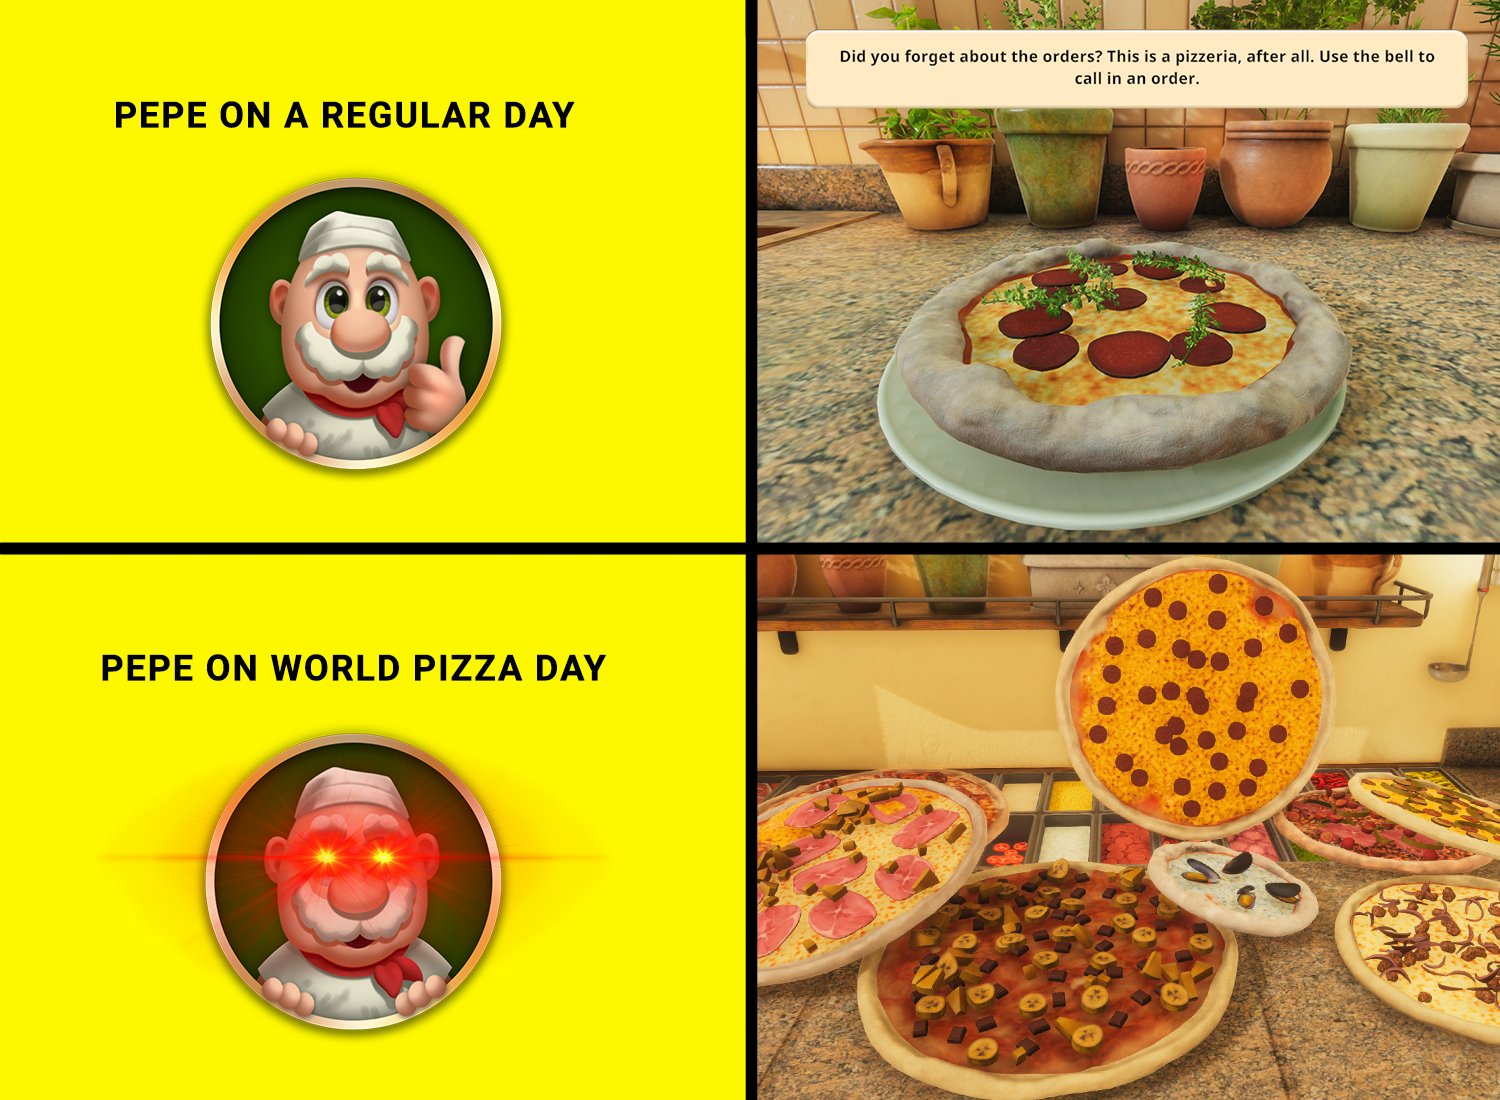 Cooking Simulator on X: Today is the World Pizza Day aka “You can